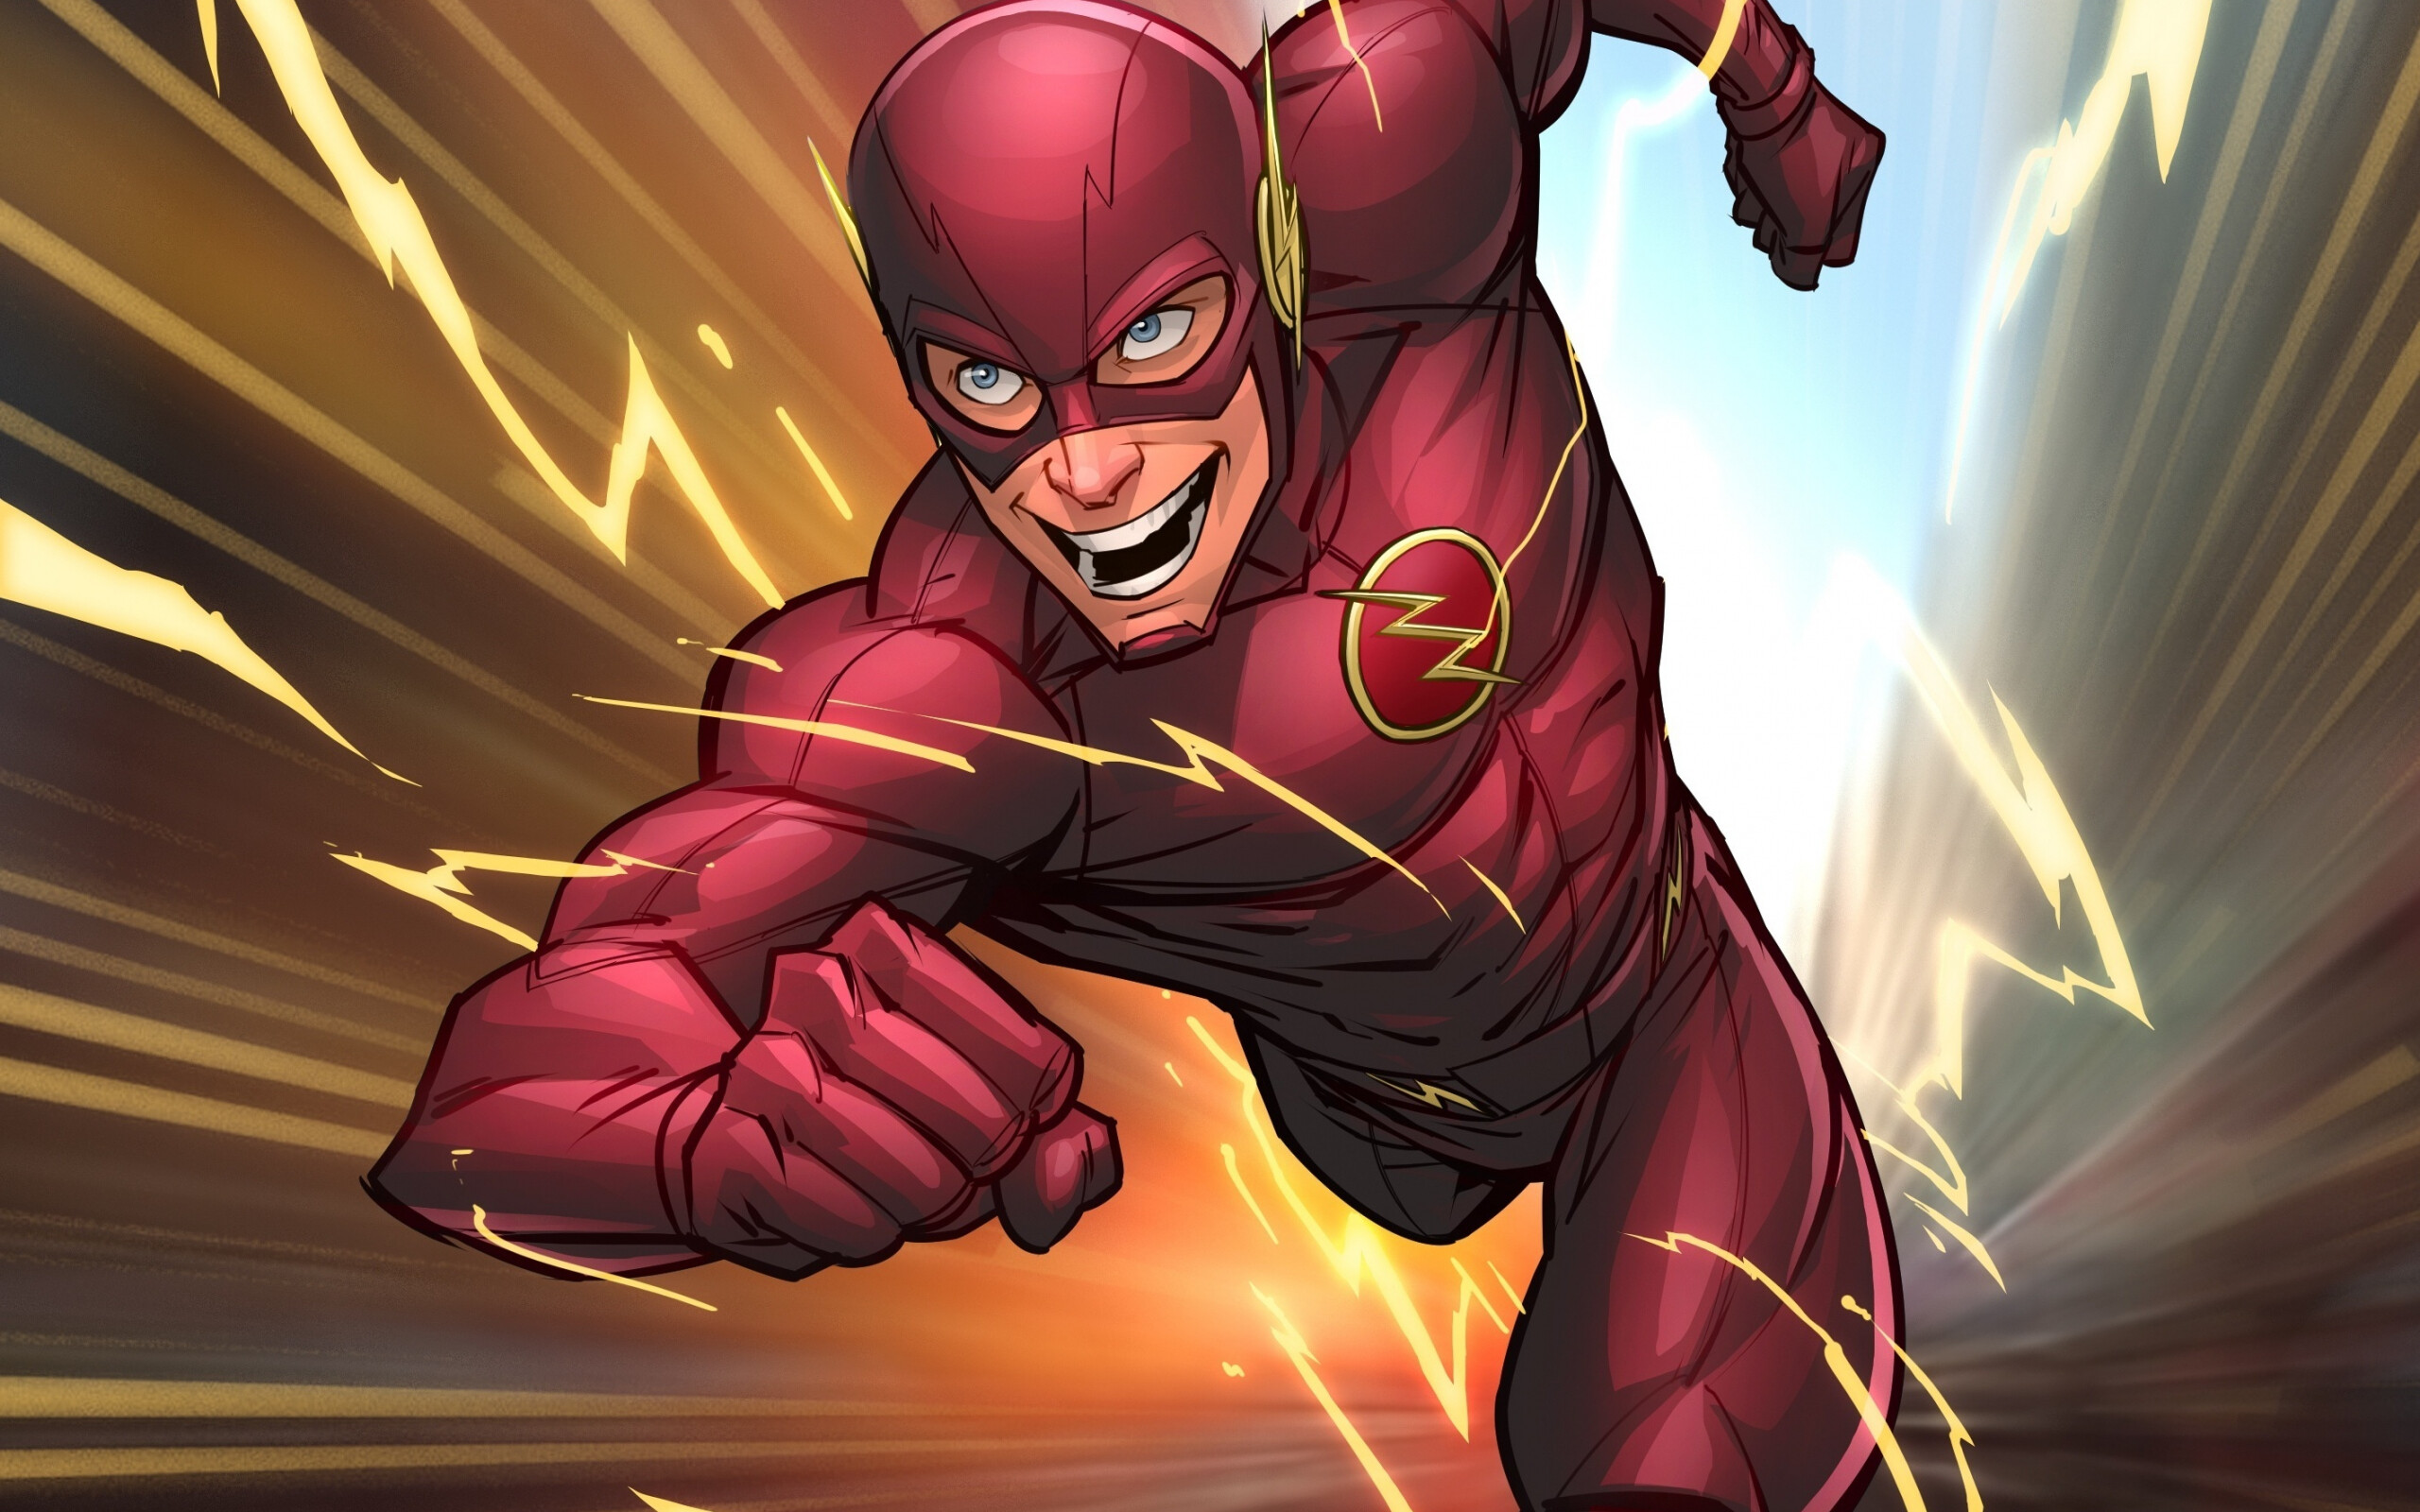 Flash (DC): Barry Allen, wakes up from his coma to discover he's been given the power of super speed, DCU, Comics. 2560x1600 HD Wallpaper.